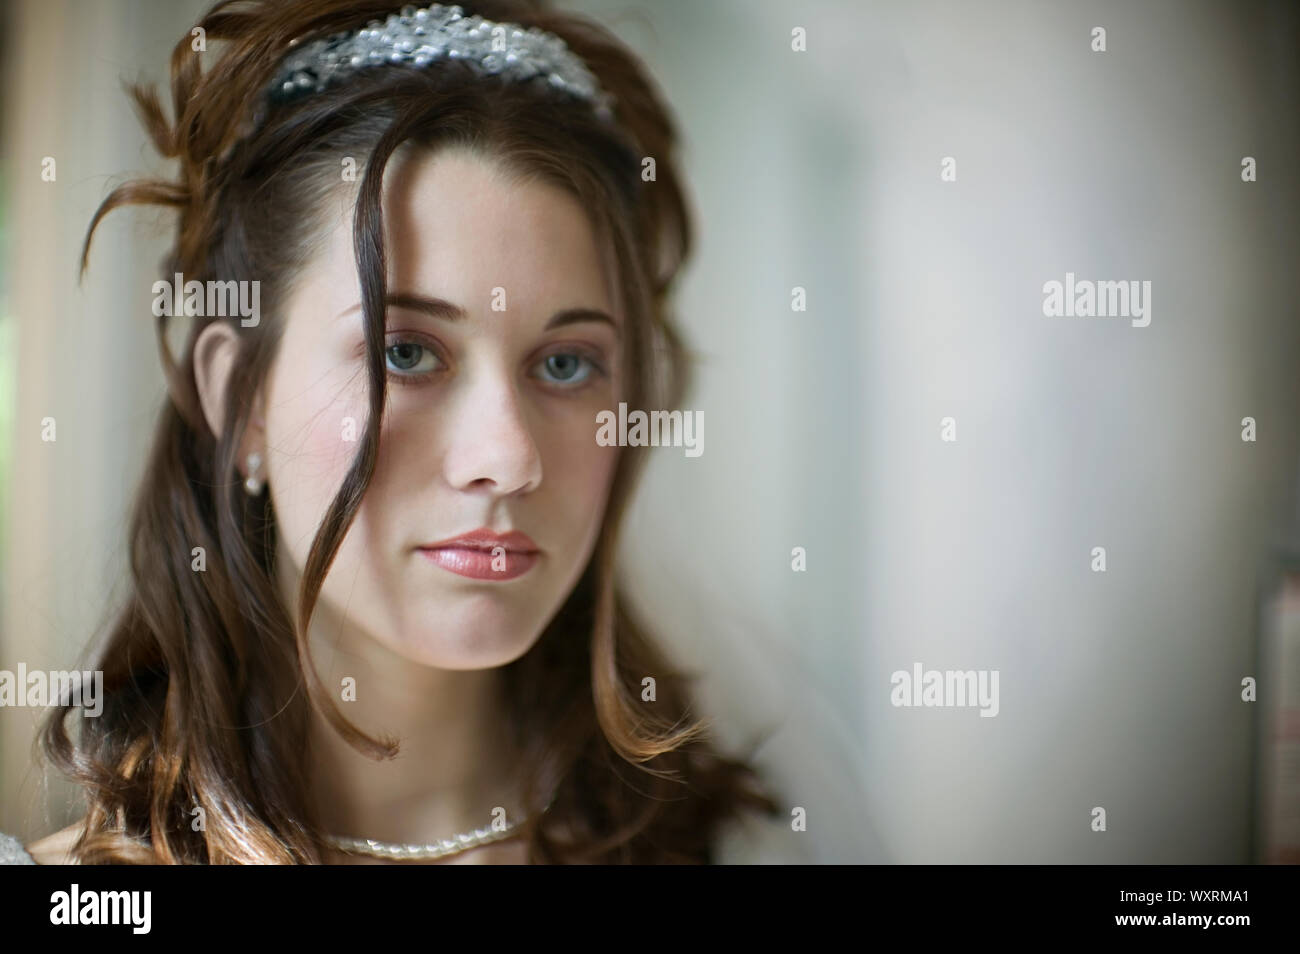 Portrait of a young bride. Stock Photo